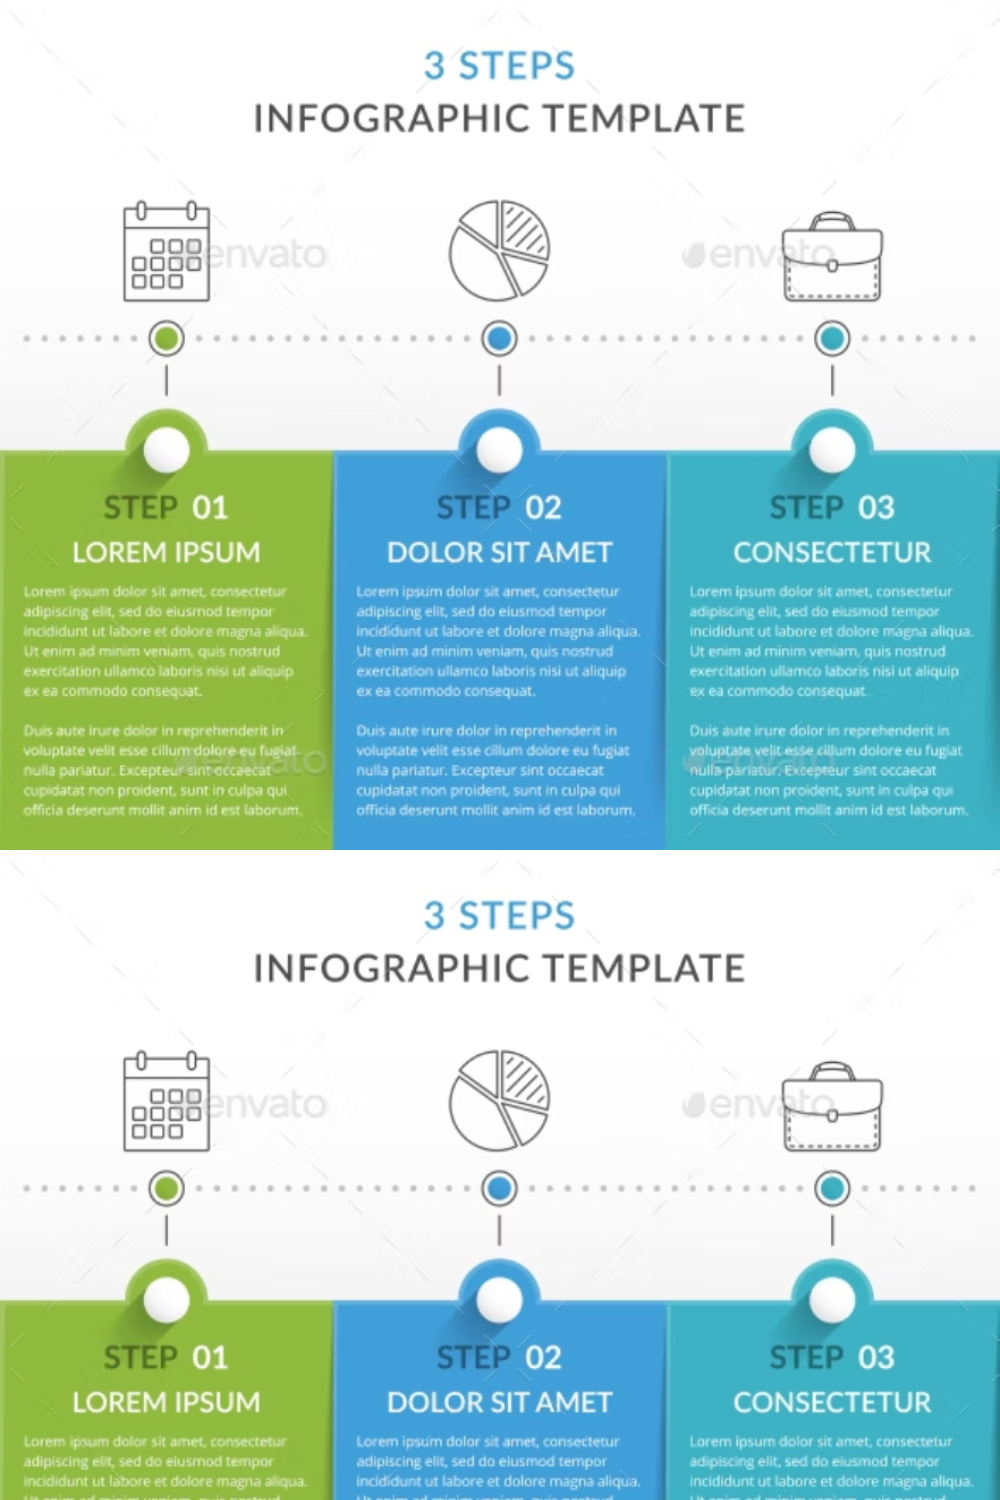 3 Steps - Infographic Template Pinterest Cover.